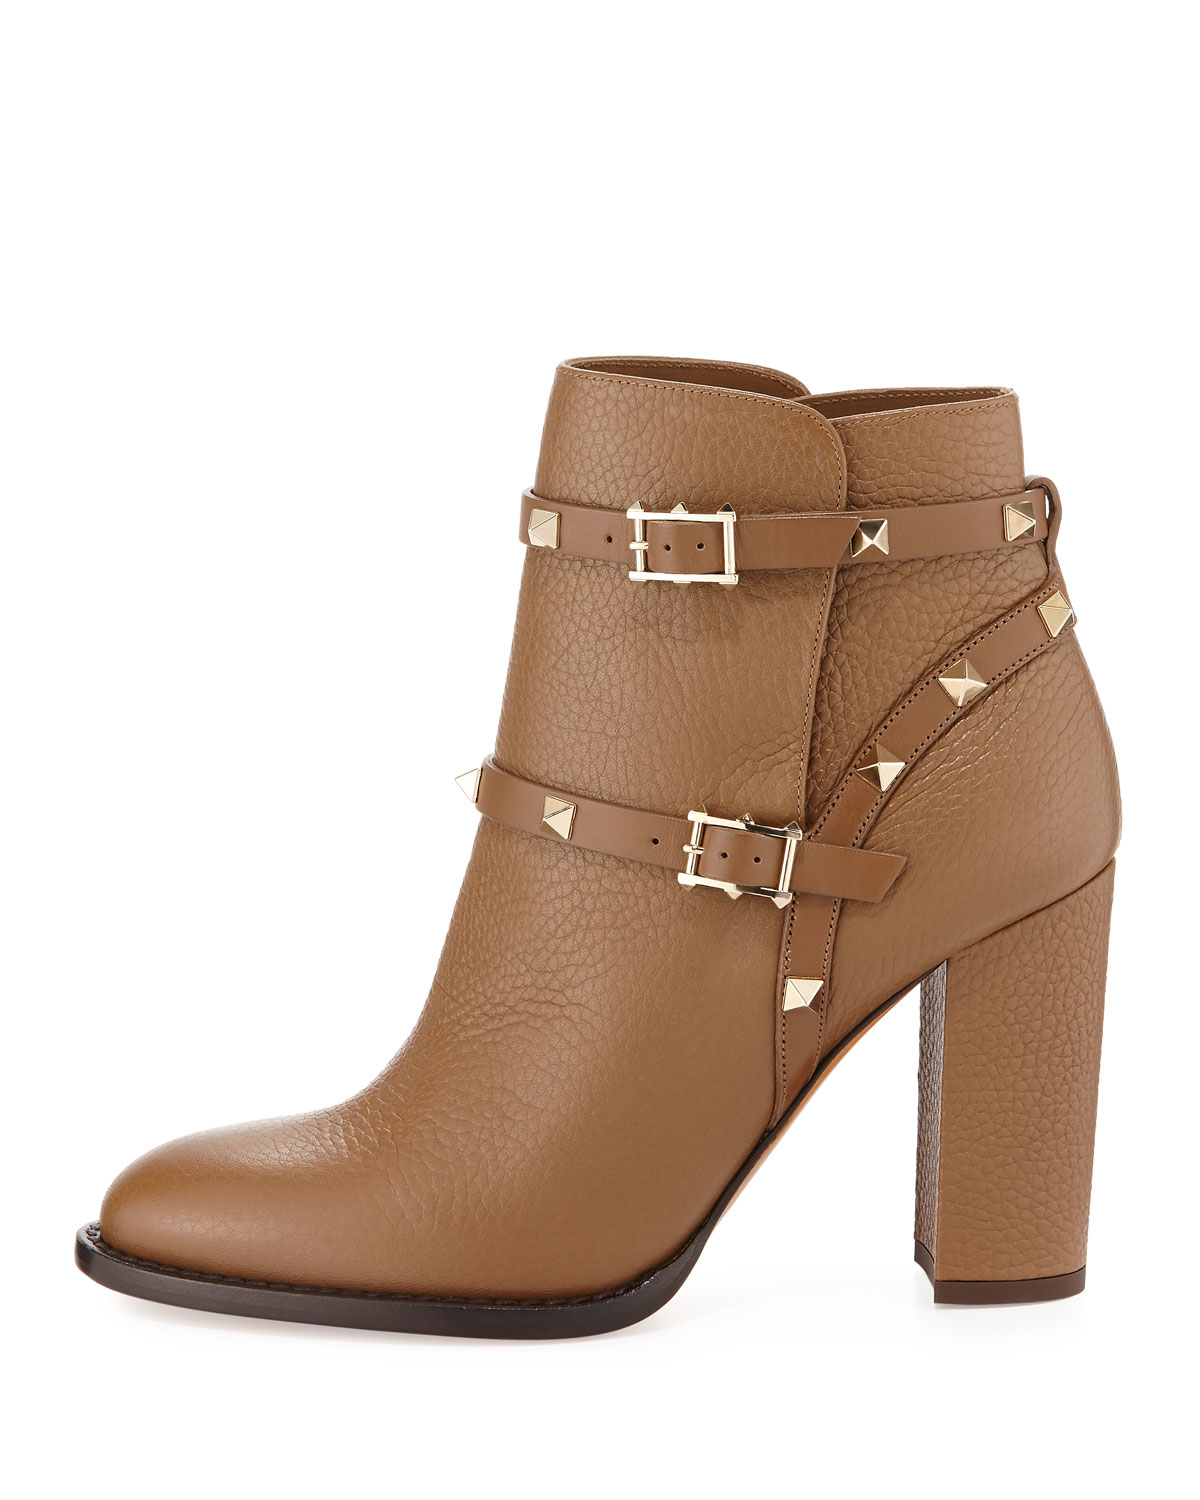 Lyst - Valentino Rockstud Leather Chunky-heel Boot in Brown